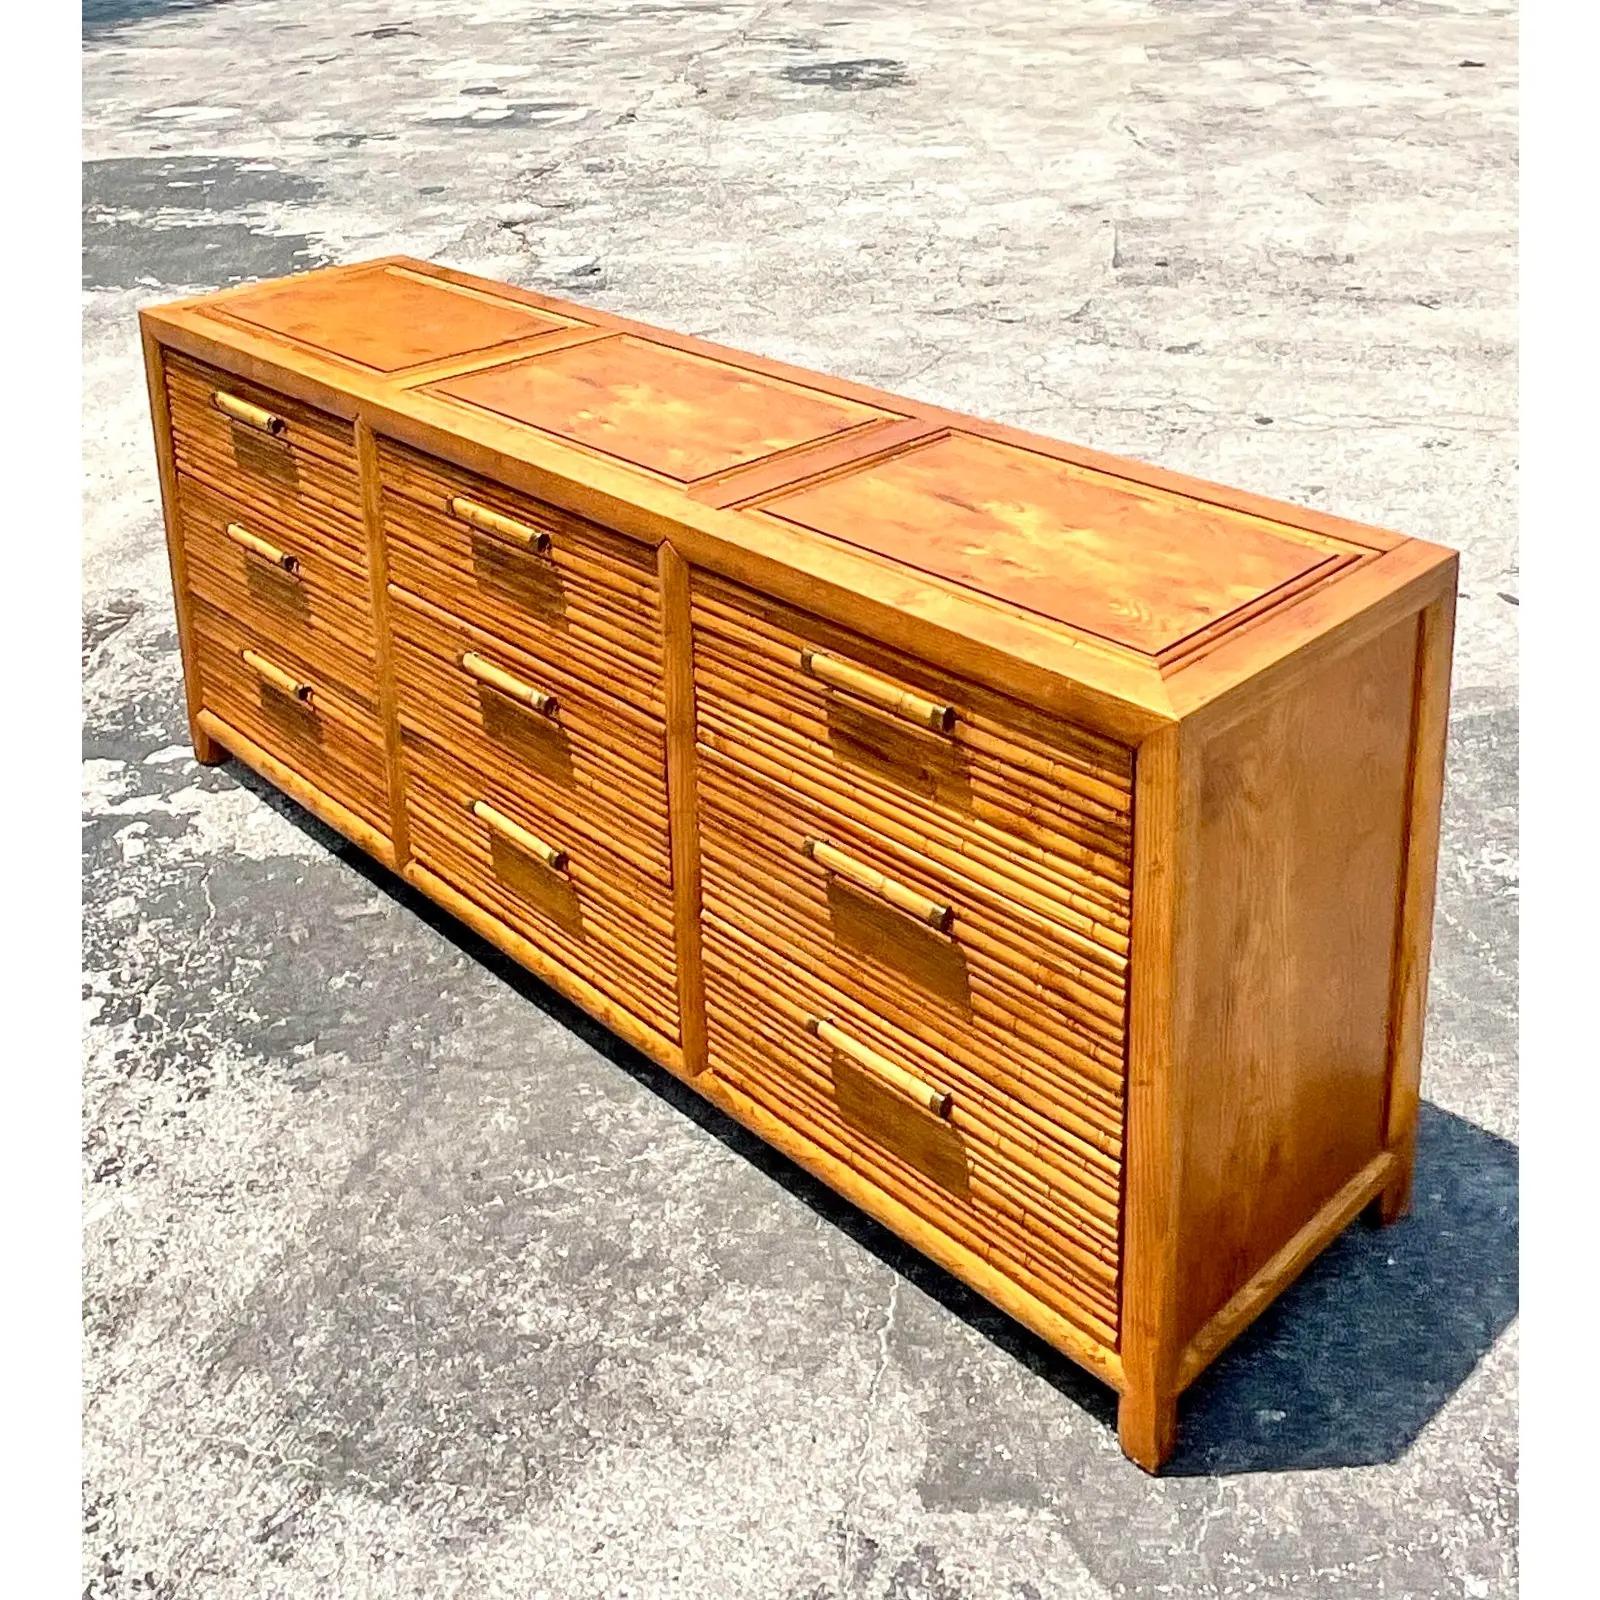 Fantastic vintage Coastal dresser. Made by the iconic Century furniture company. Beautiful carved bamboo detail and chic bamboo drawer pulls. Marked on the inside. Acquired from a Palm Beach estate.